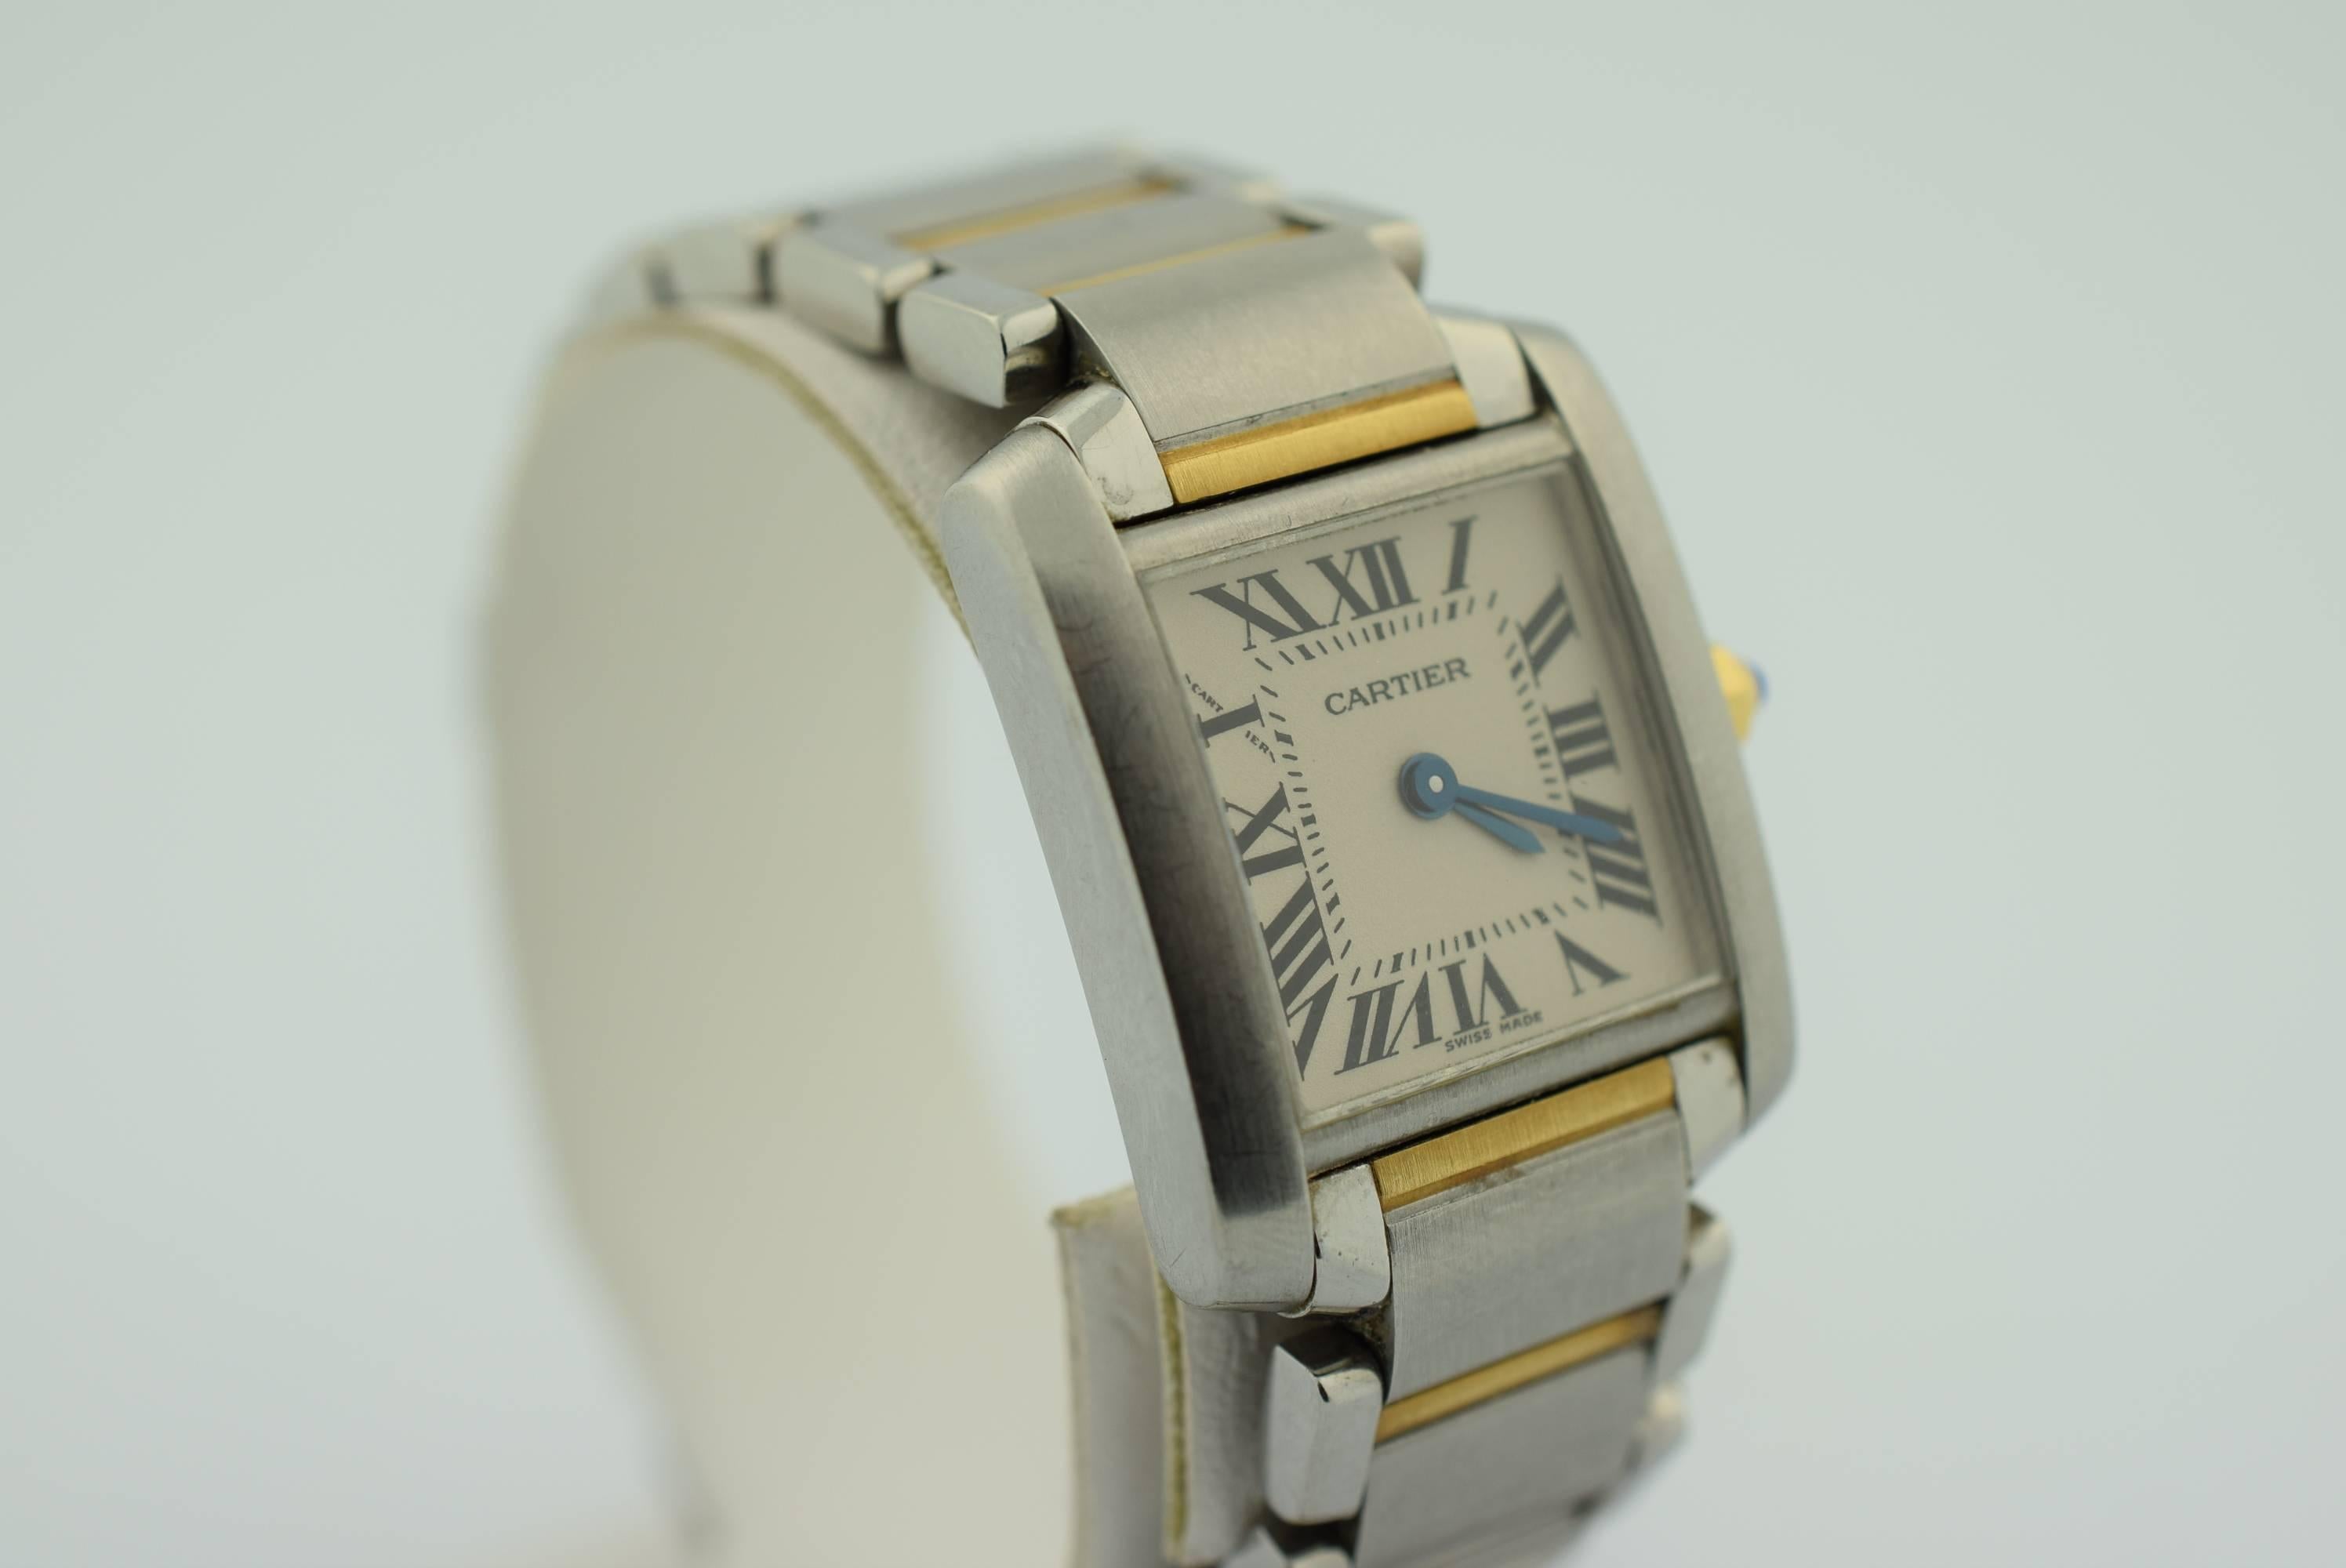 Cartier Tank Francaise Two Tone Gold .Quartz movement .Circa :2012.Swiss made .
Excellent condition .20 mm x 20 mm case dimensions.Silver dial .Roman numerals .
18 k yellow Gold & Stainless band .Saphirre Crystal .Warranted for one year from date